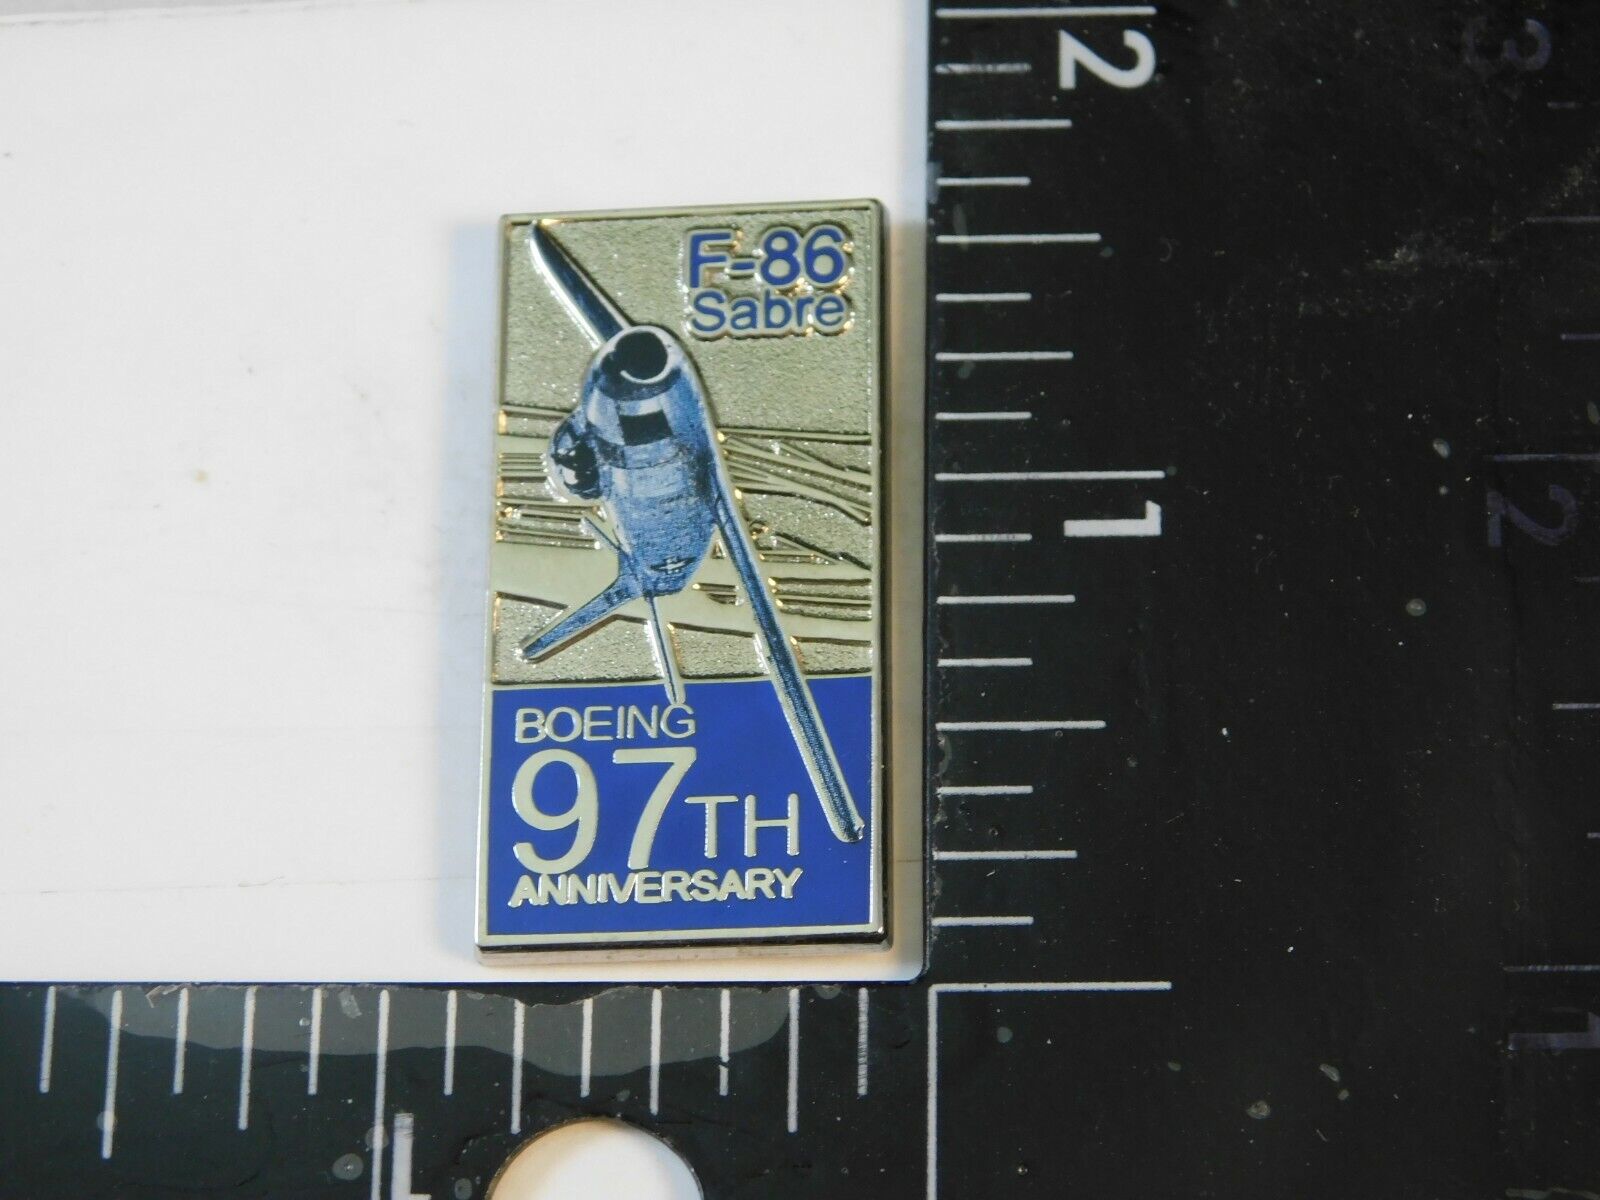 BOEING F-86 SABRE 97th ANNIVERSARY ADVERTISEMENT PIN